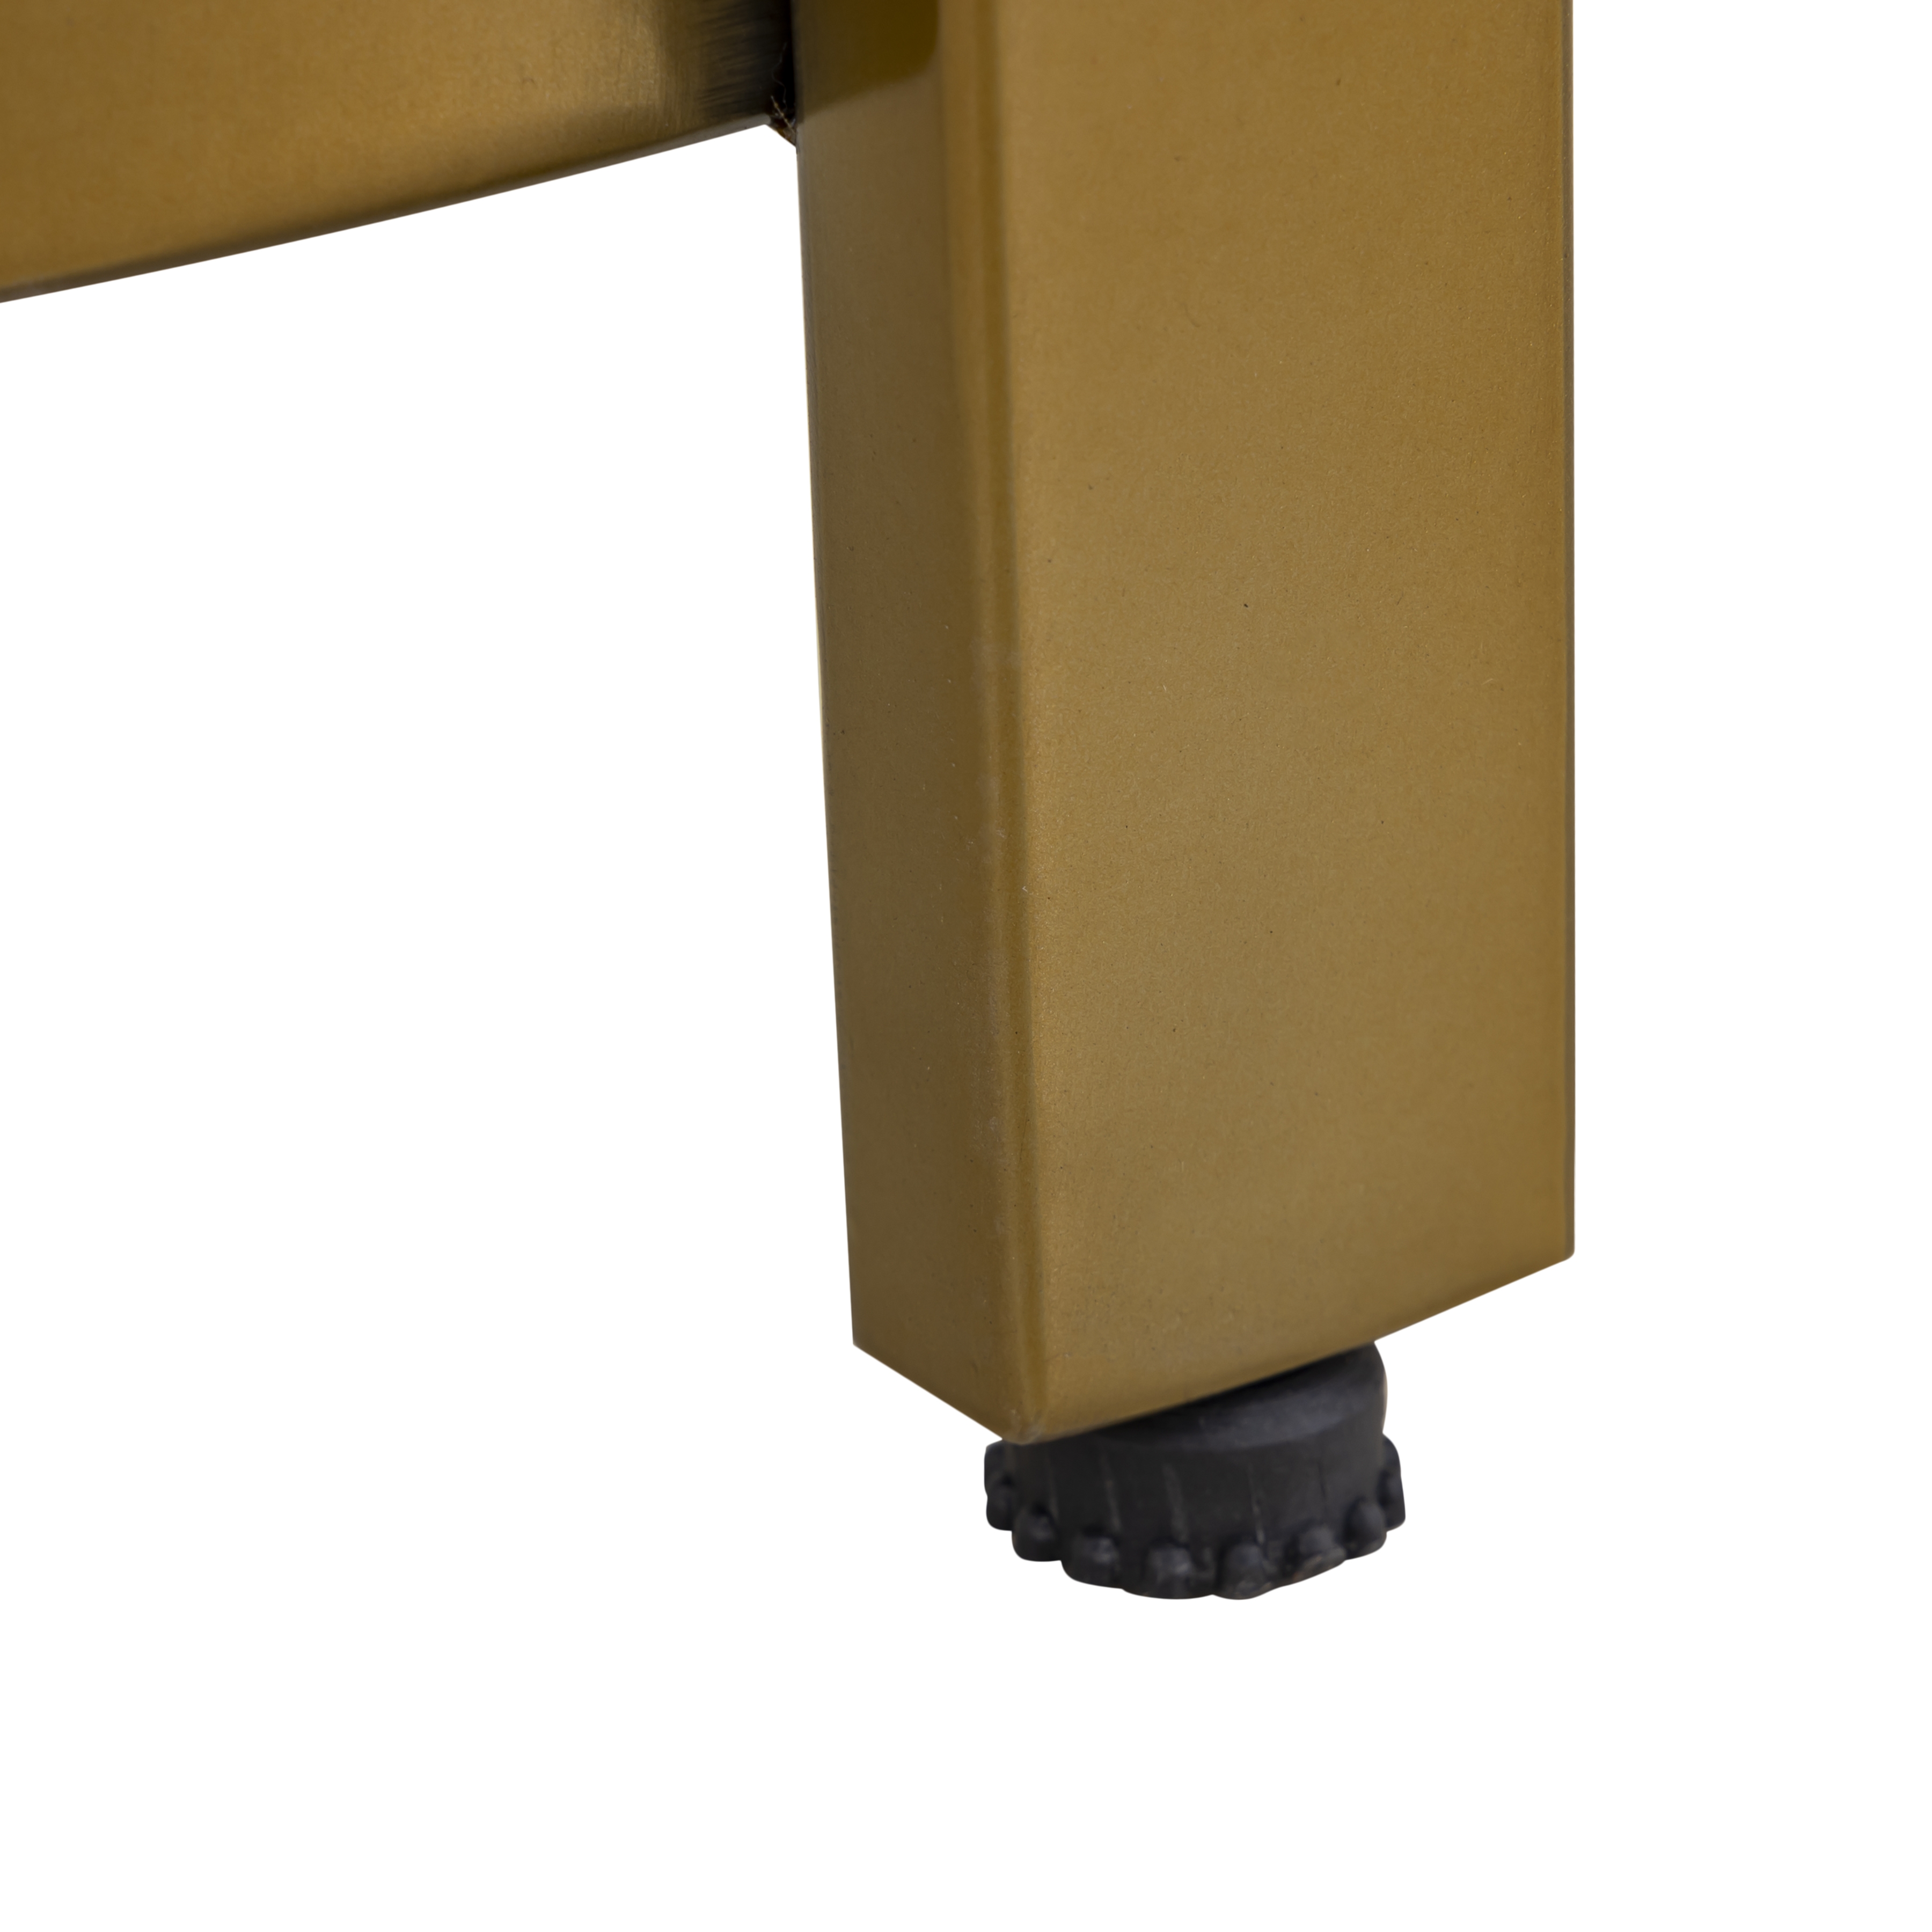 Blain Console Table - Brass - Image 6